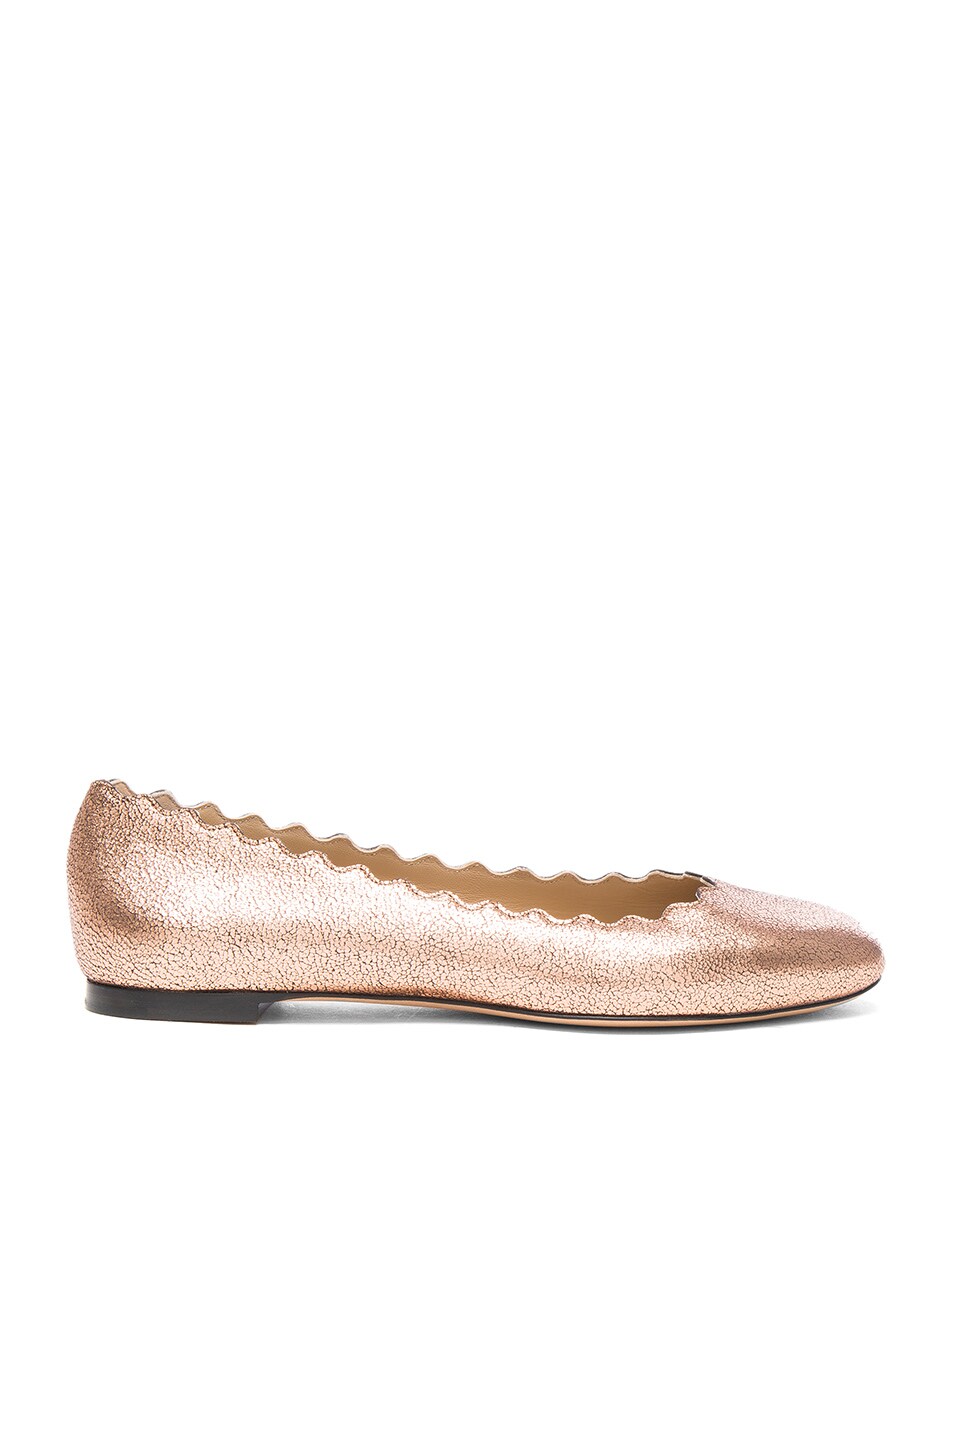 Image 1 of Chloe Lauren Leather Flats in Pink Gold